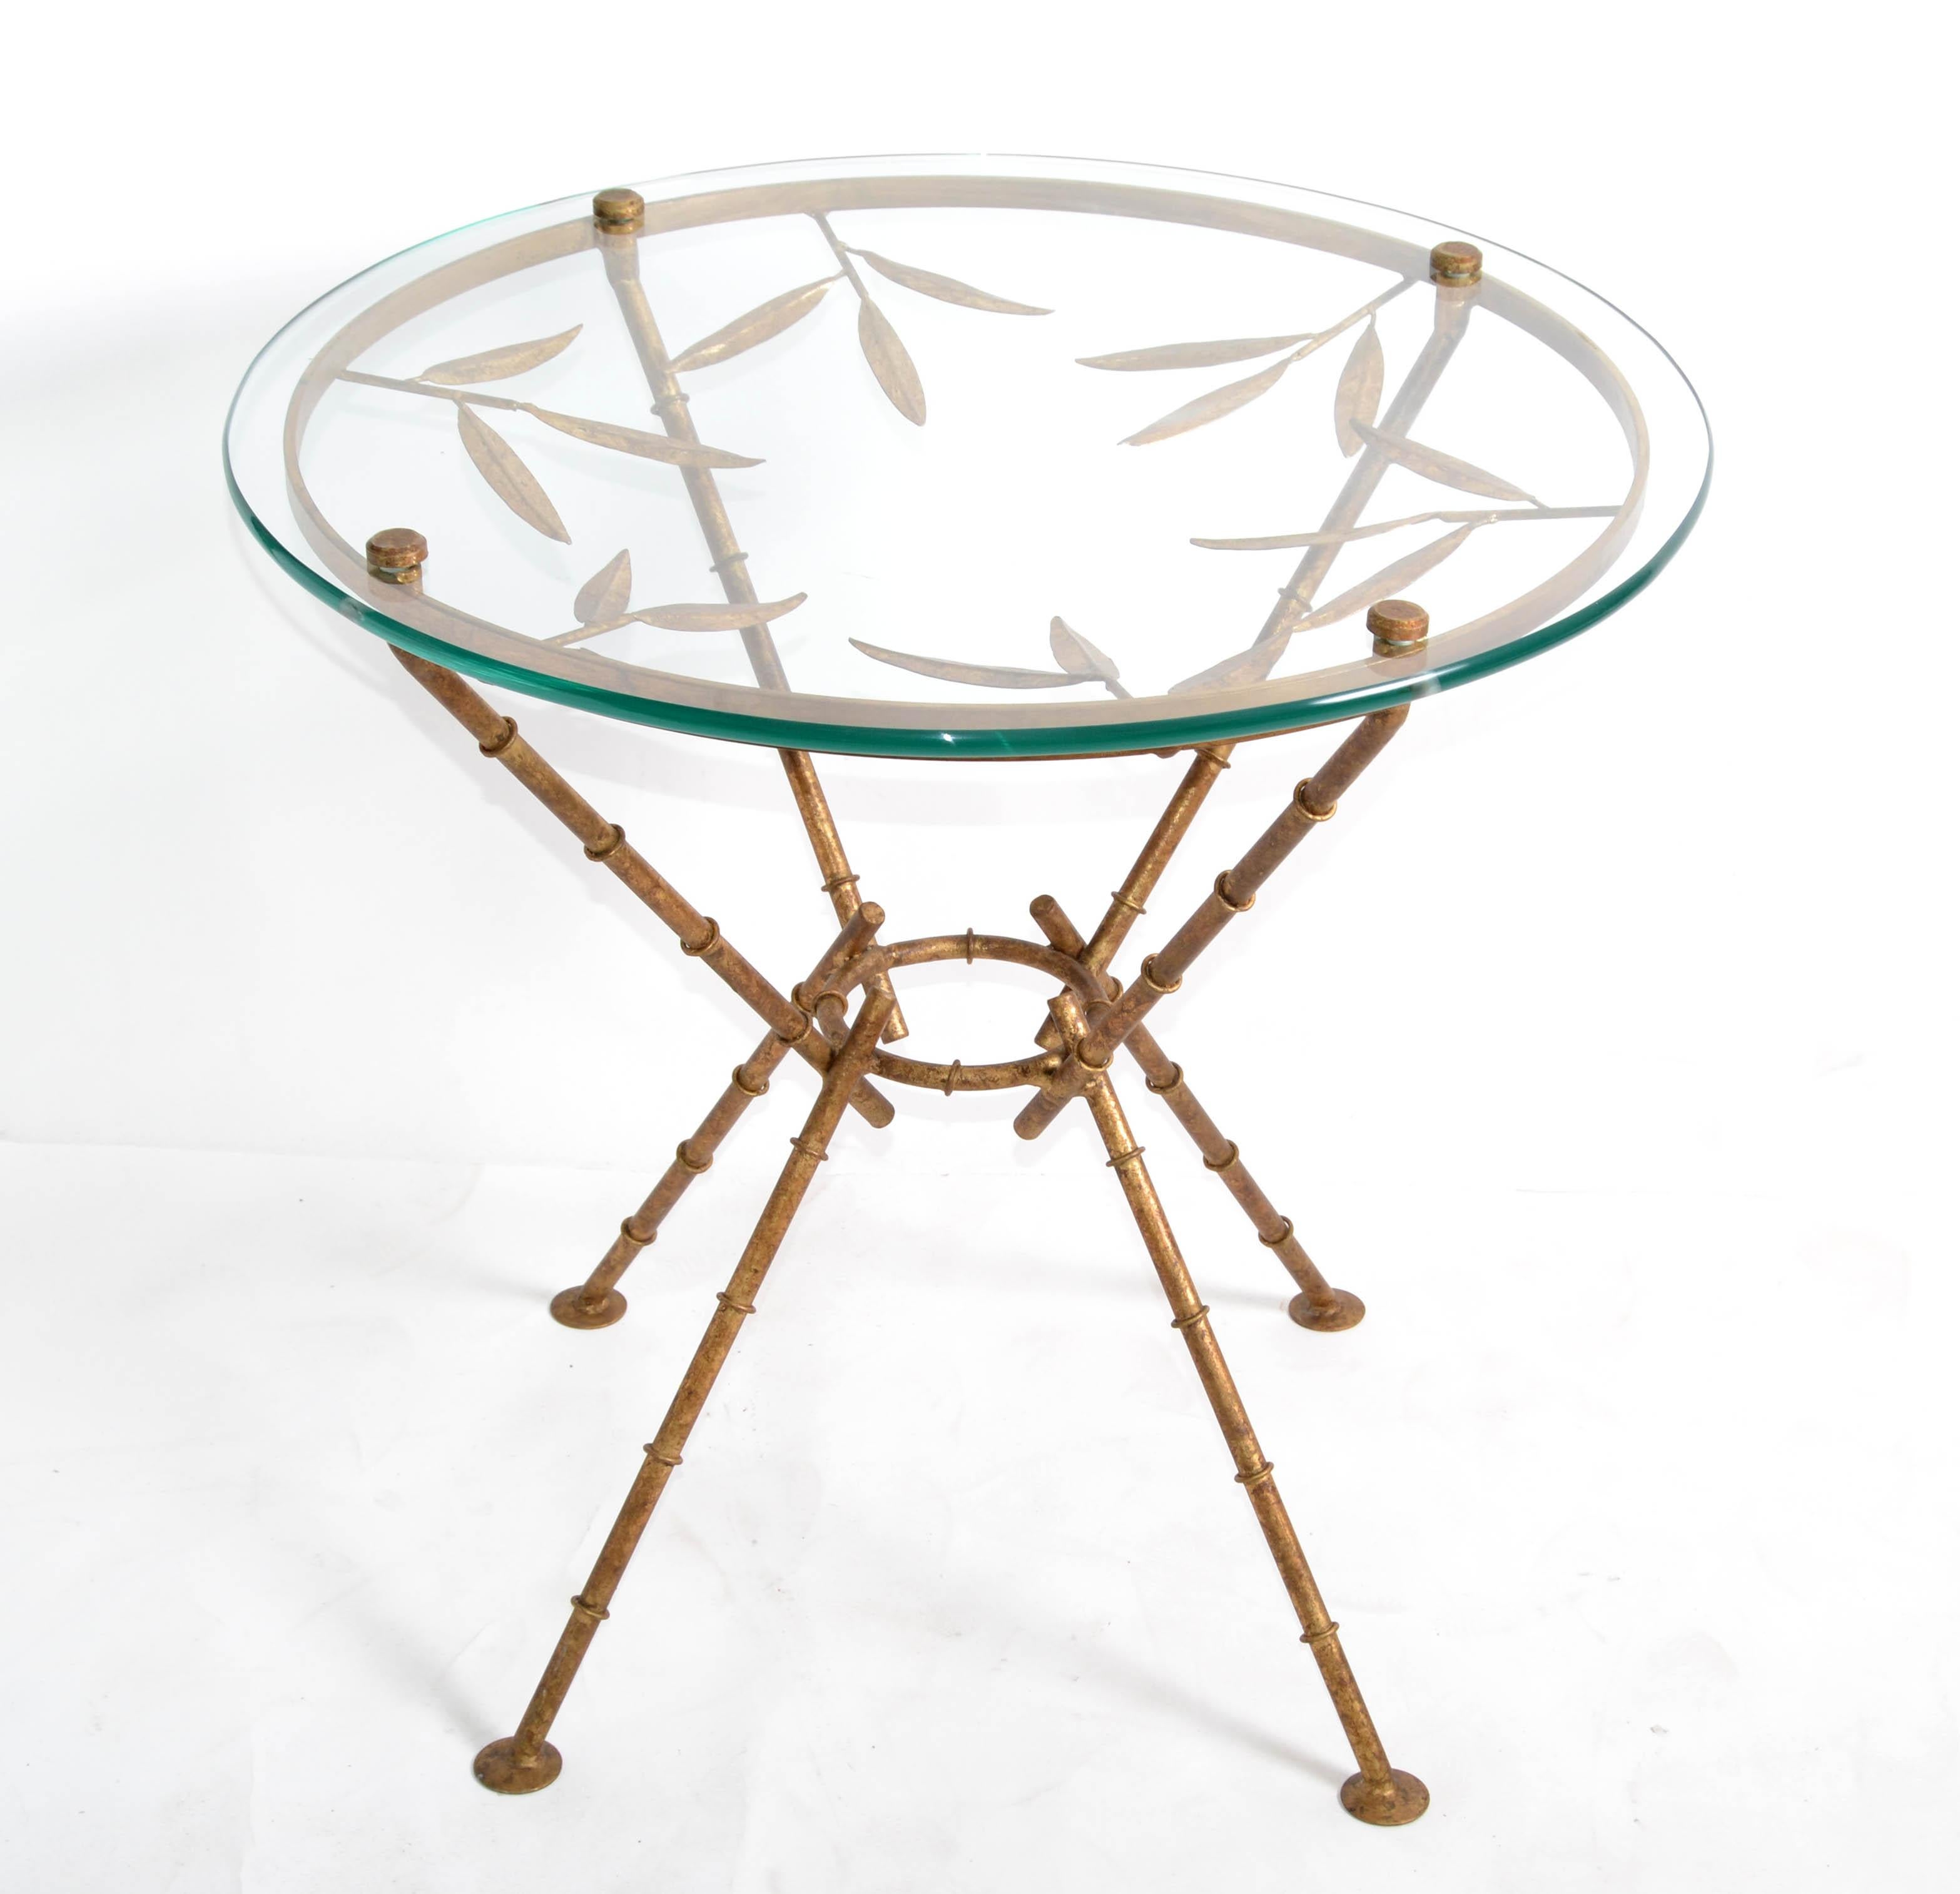 Neoclassical Maison Baguès style bronze faux bamboo & brass leaves glass cocktail table, coffee table French Traditional.
Detailed Craftsmanship with a great love of nature.